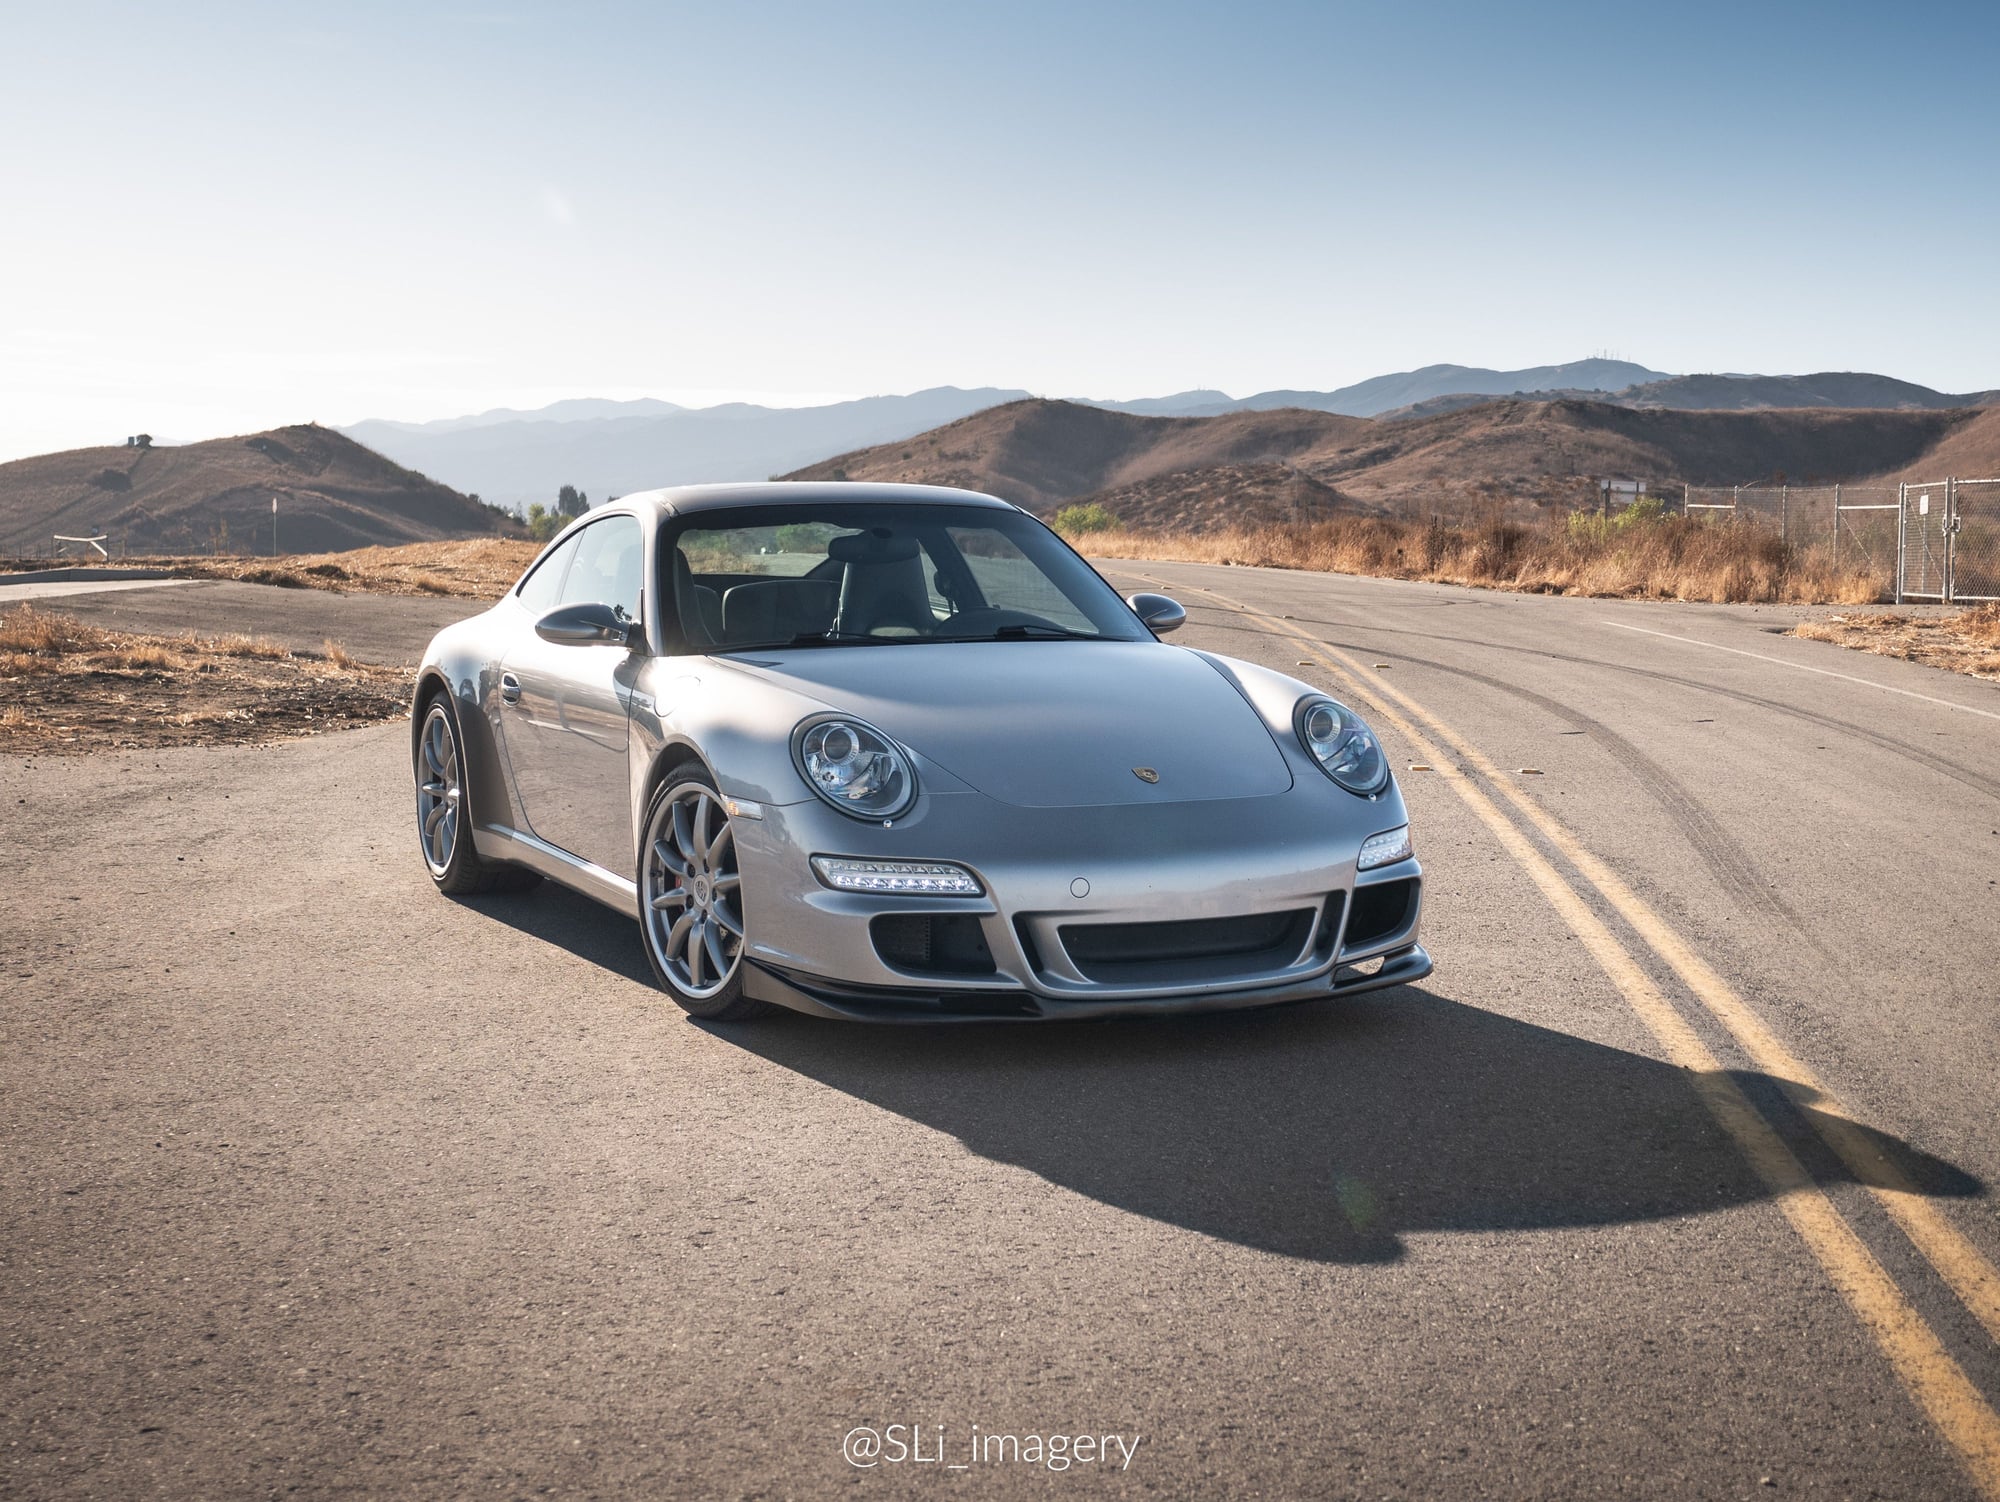 2008 Porsche 911 - 2008 Porsche Carrera S GT3 Front Bumper Carrera Sport Wheels Fister Exhaust - Used - VIN WP0AB29968S730278 - 133,600 Miles - 6 cyl - 2WD - Manual - Coupe - Silver - Norco, CA 92860, United States